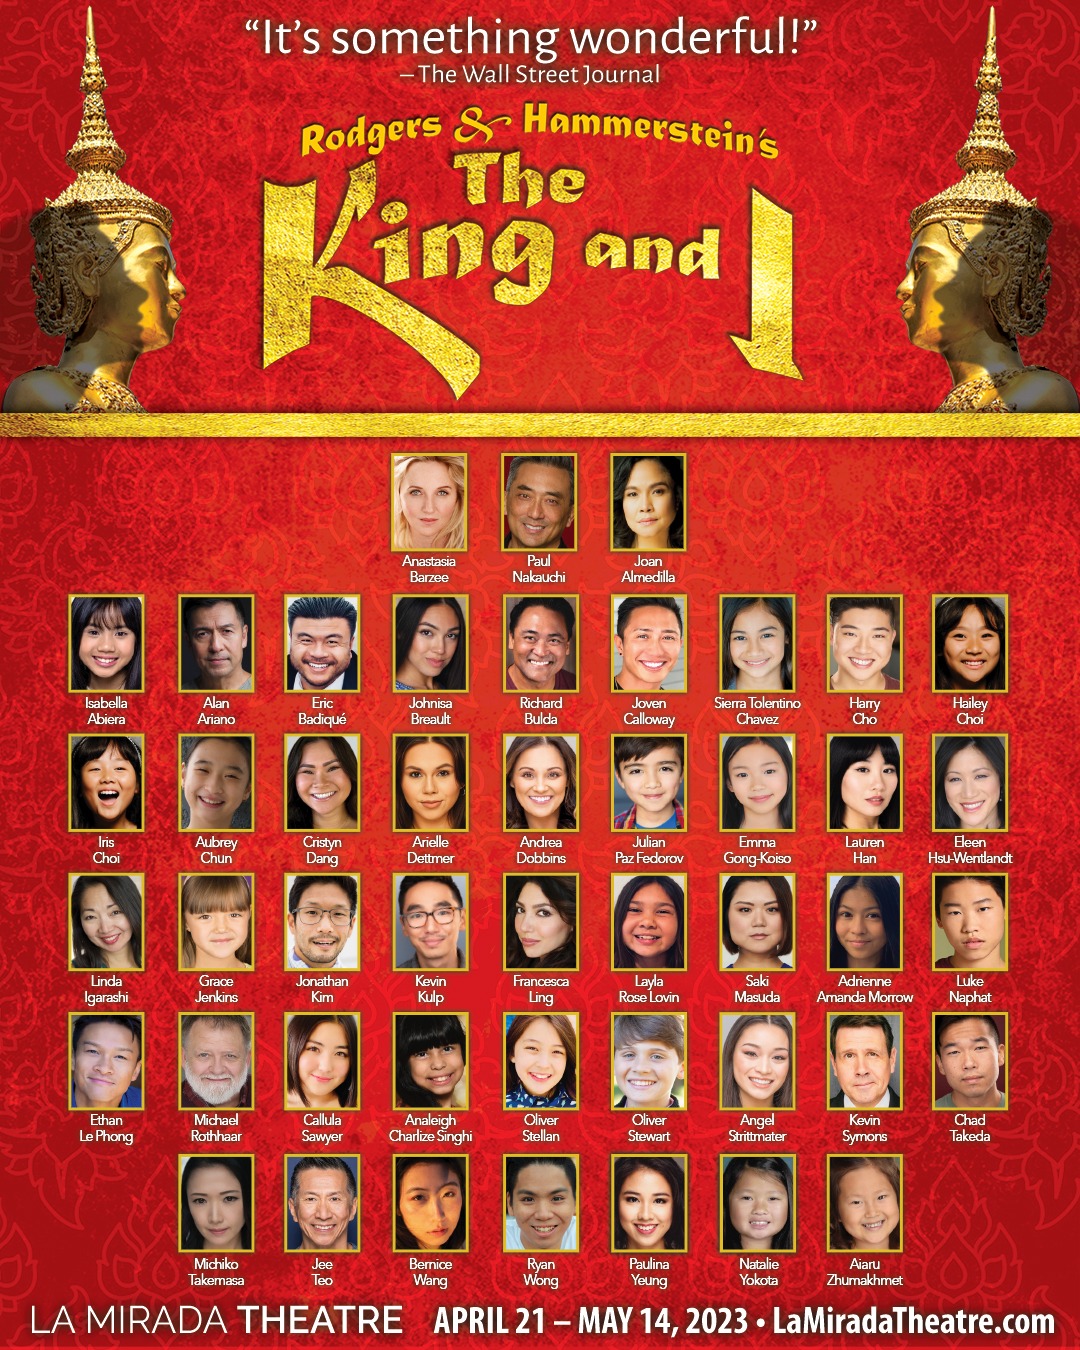 Adrienne Amanda Morrow in The King and I by McCoy Rigby Entertainment at La Mirada Theatre for the Performing Arts - April 21 through May 14, 2023